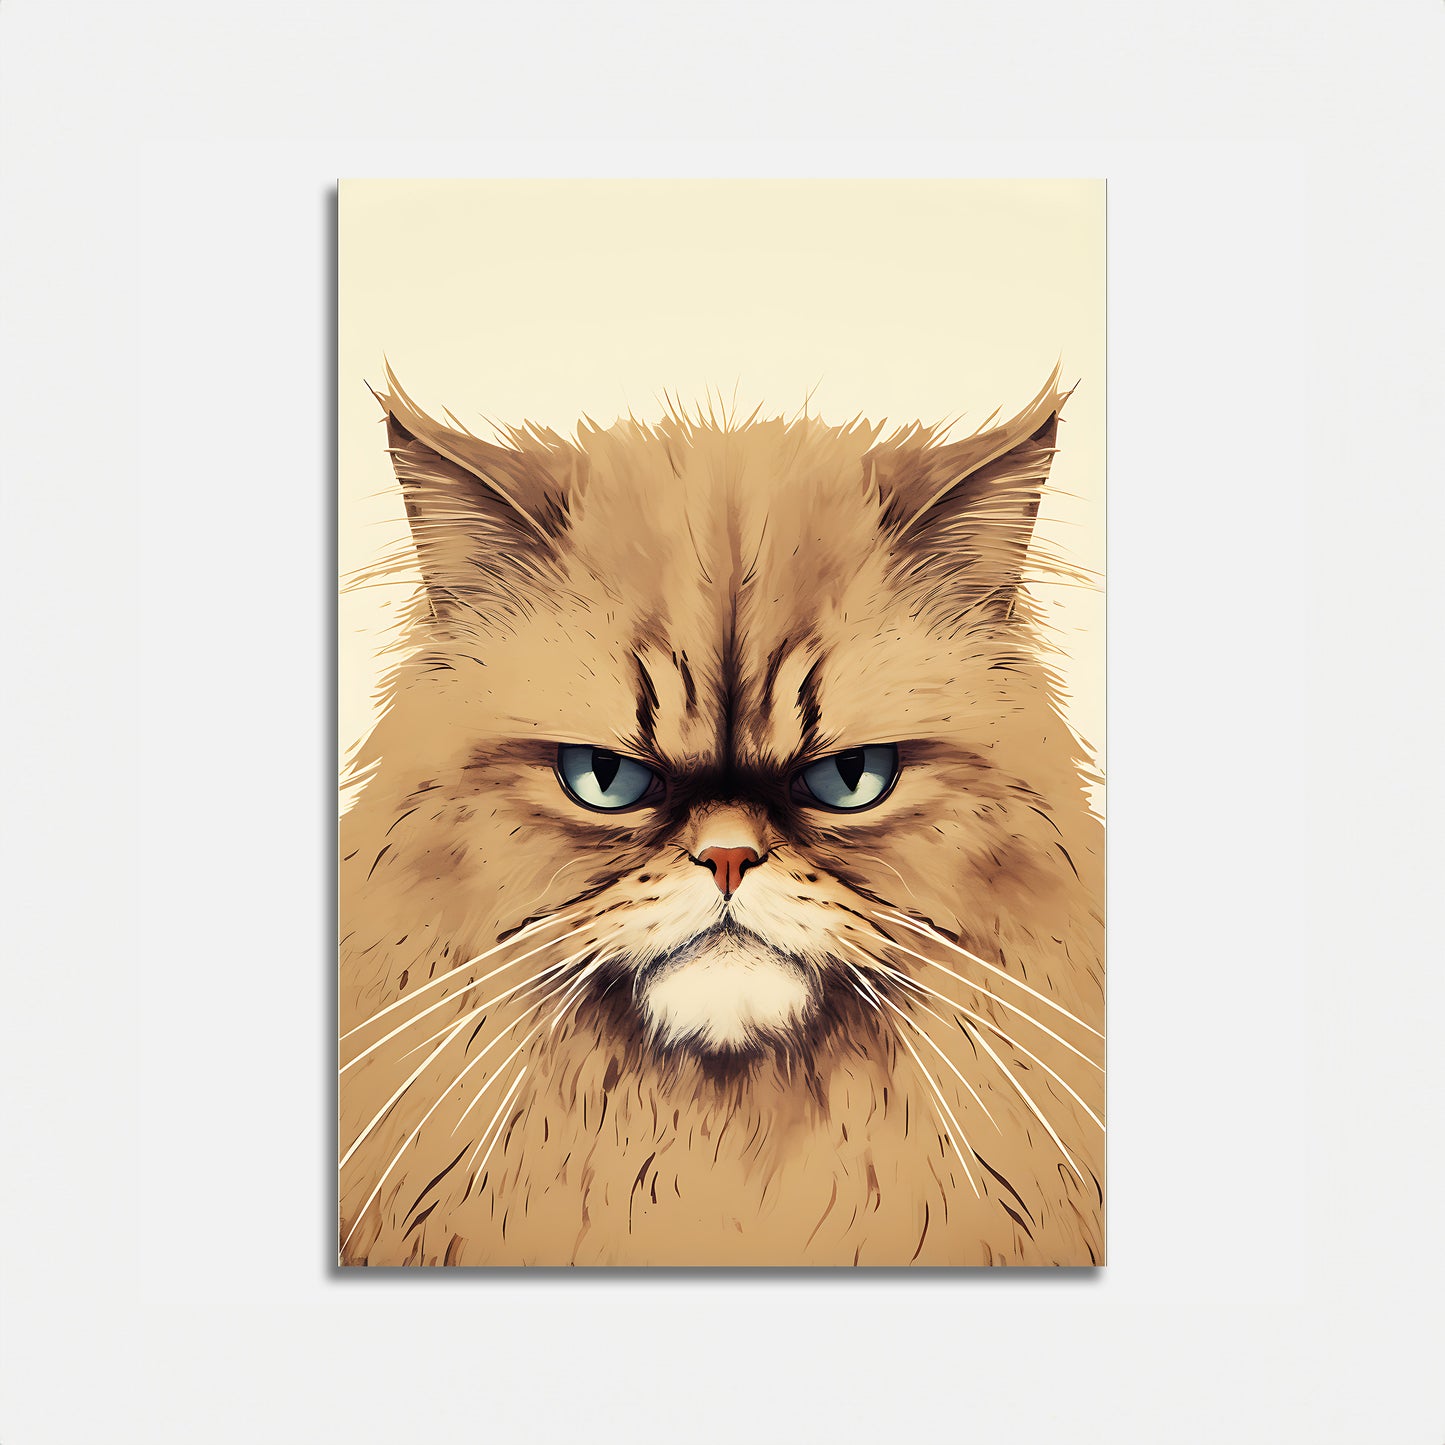 Illustration of a grumpy long-haired cat with piercing green eyes.